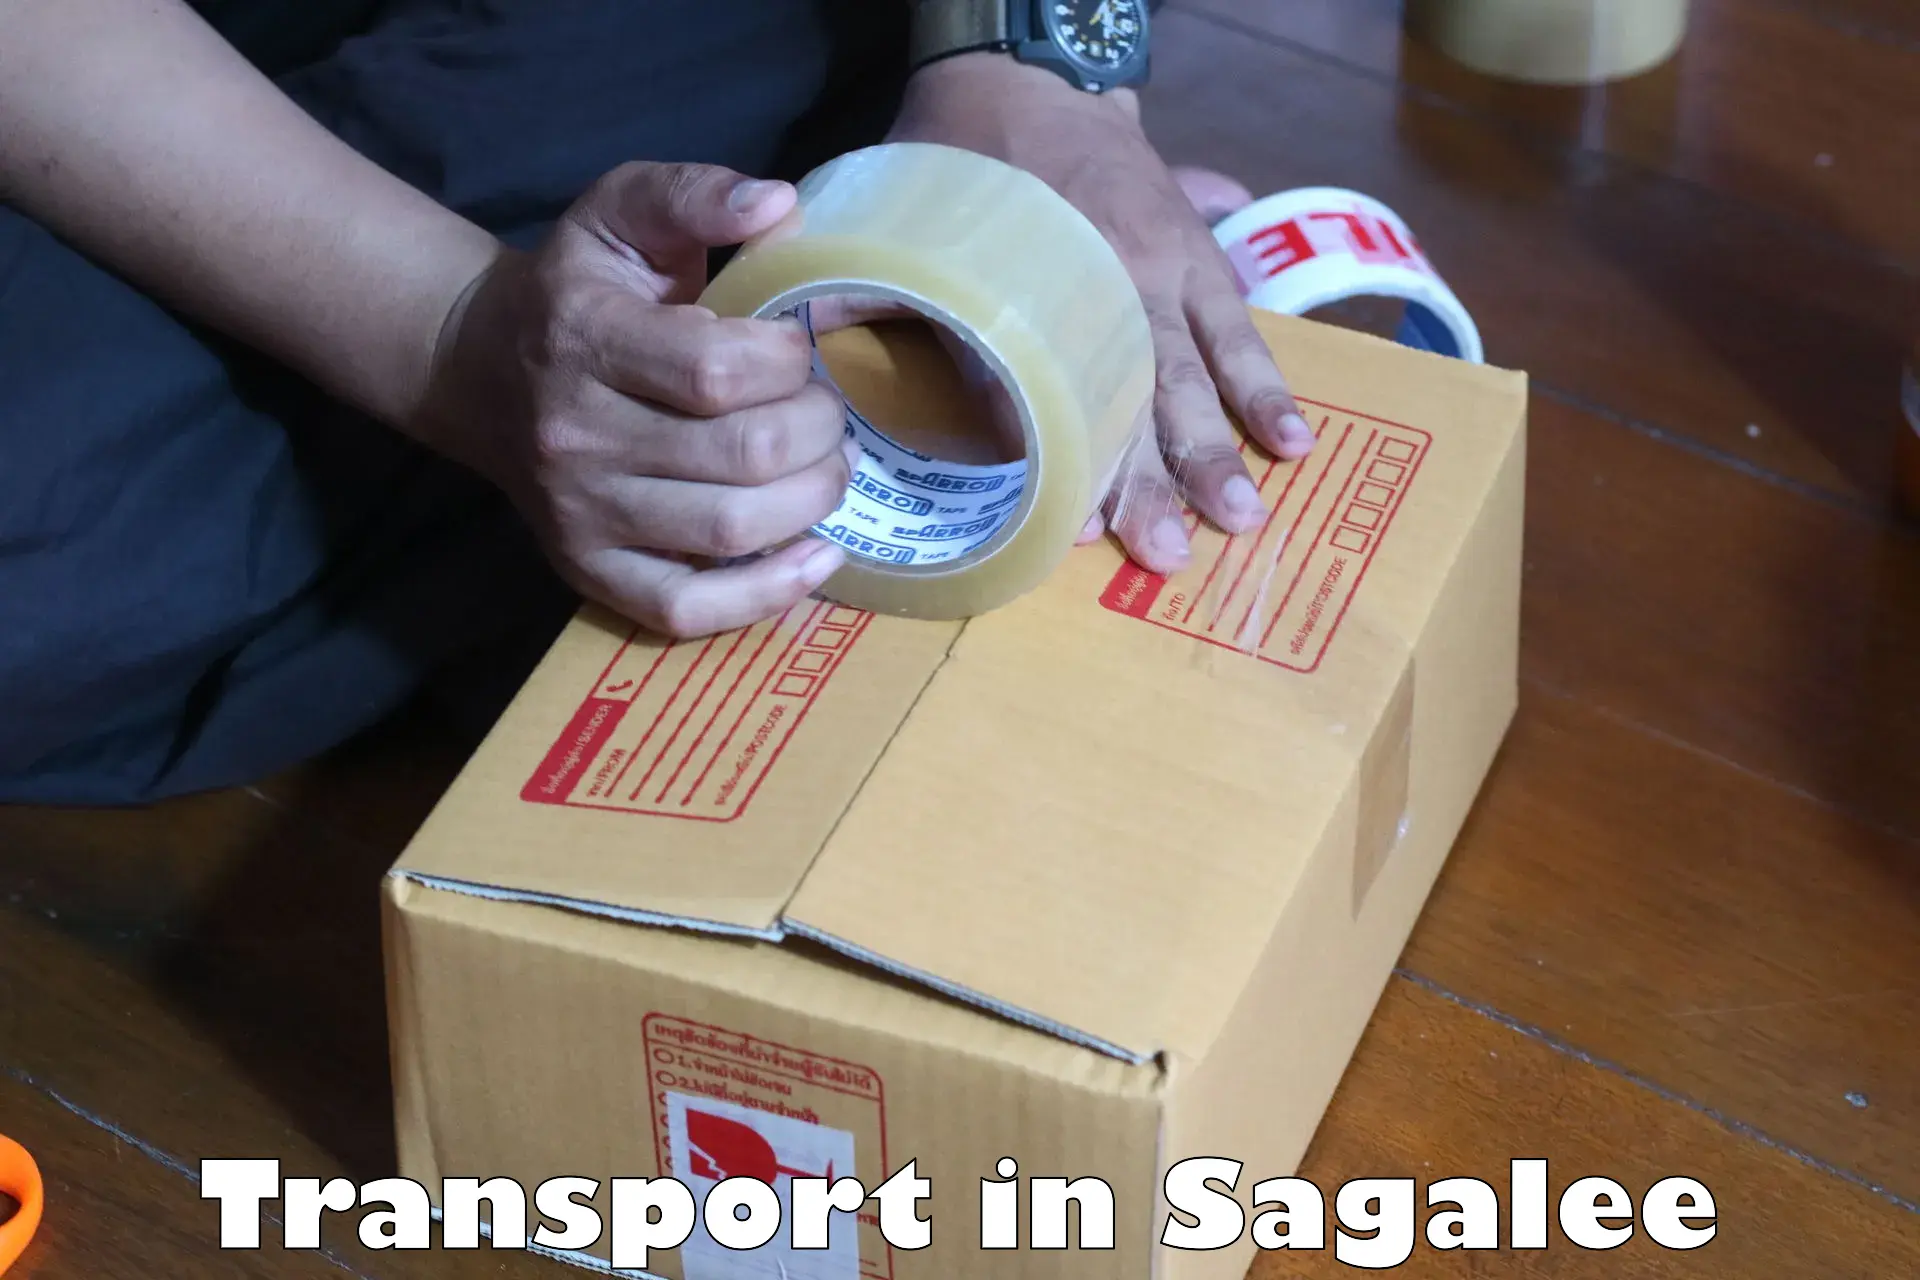 Daily parcel service transport in Sagalee